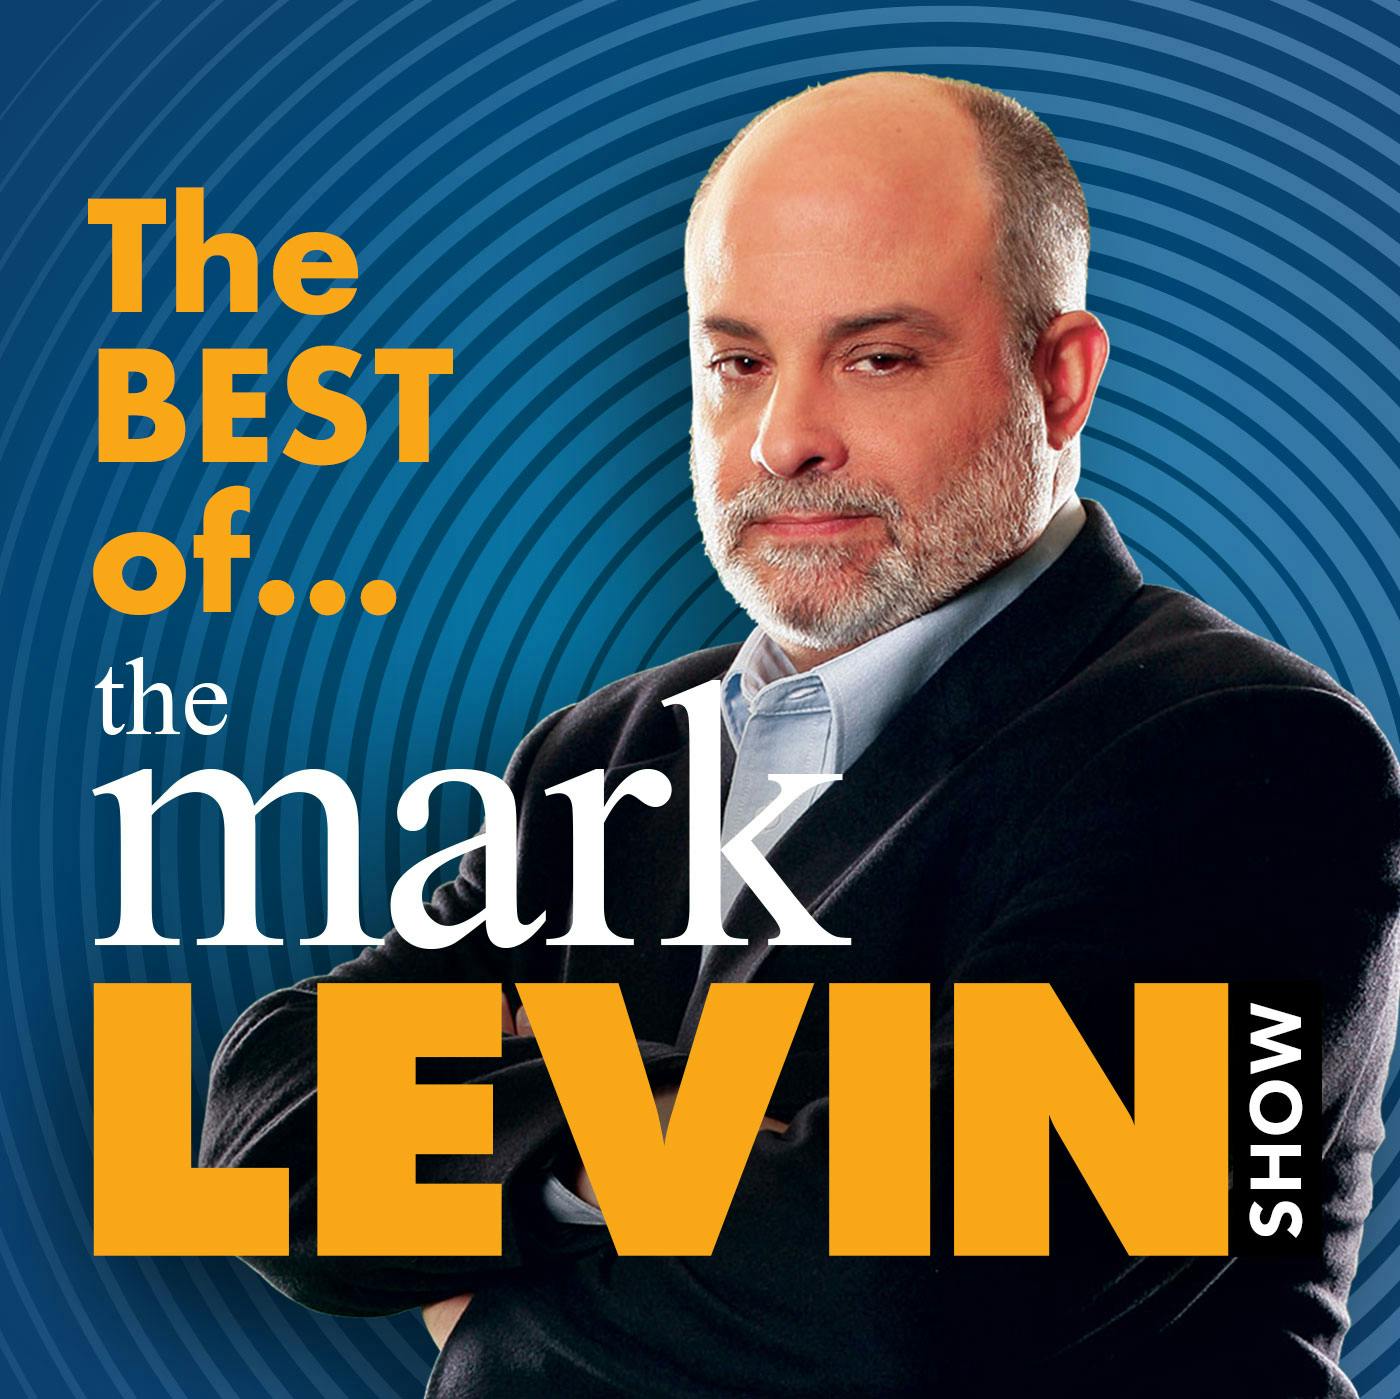 The Best Of Mark Levin - 5/4/24